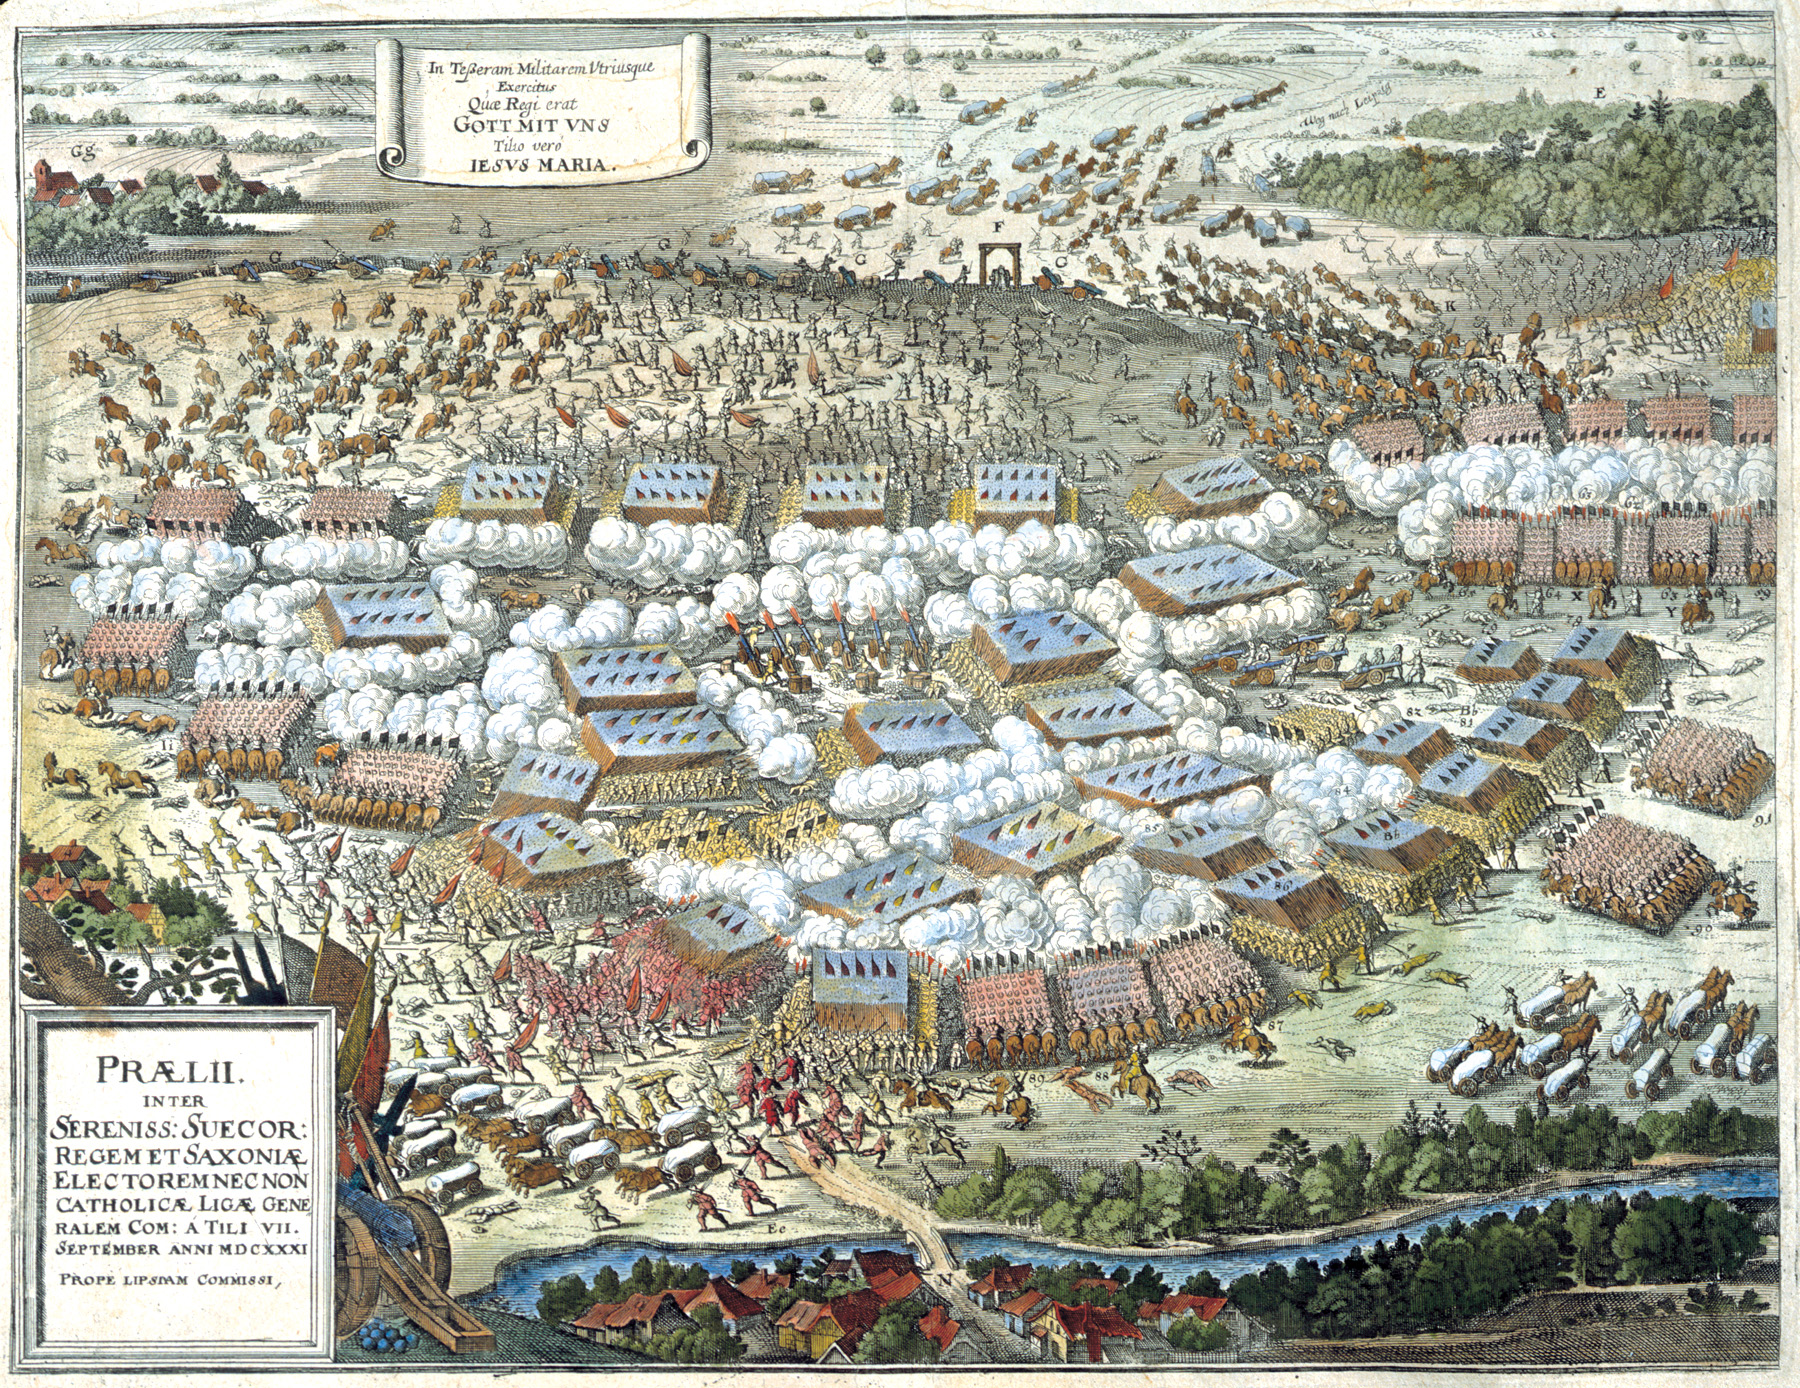 A vision of the Battle of Breitenfeld rendered on copperplate six years after the struggle. Pikes, artillery, and cavalry are all seen in action.